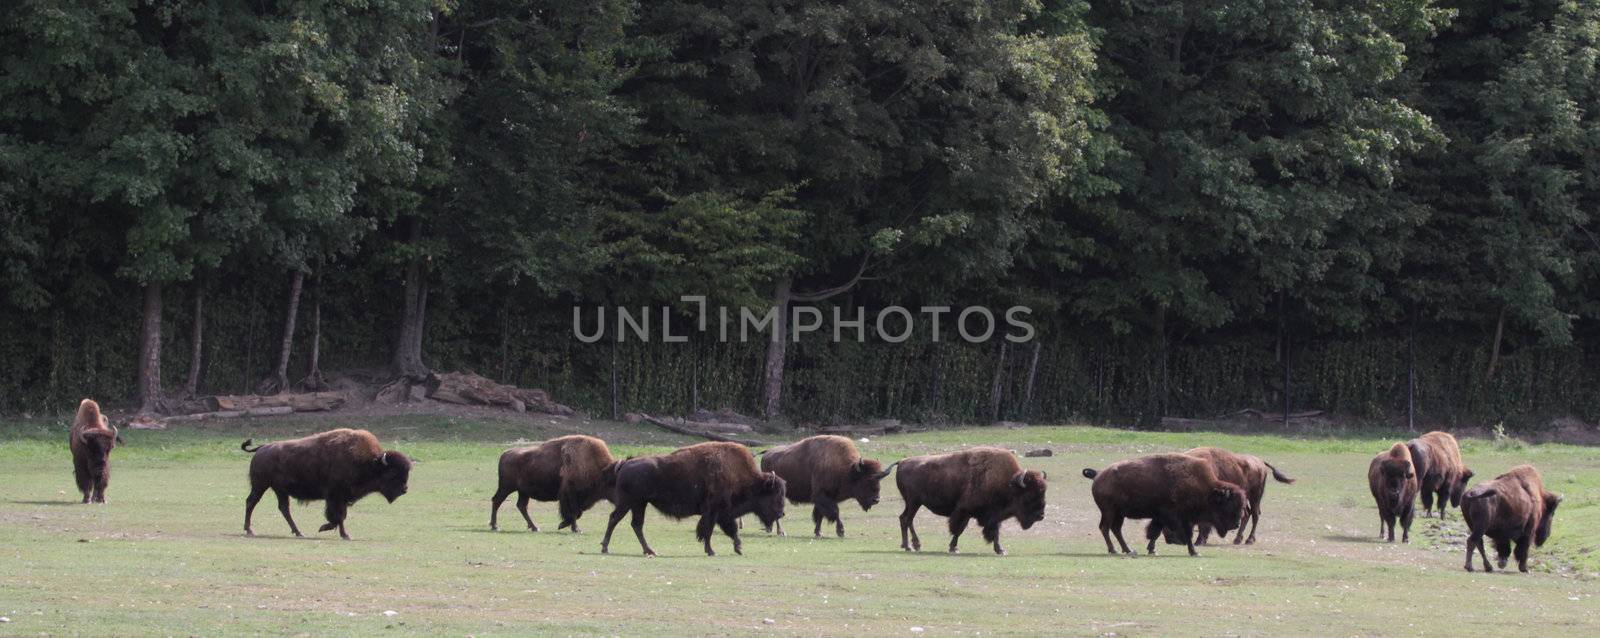 A herd of Buffalo (Bison bison athabascae) at a zoo.